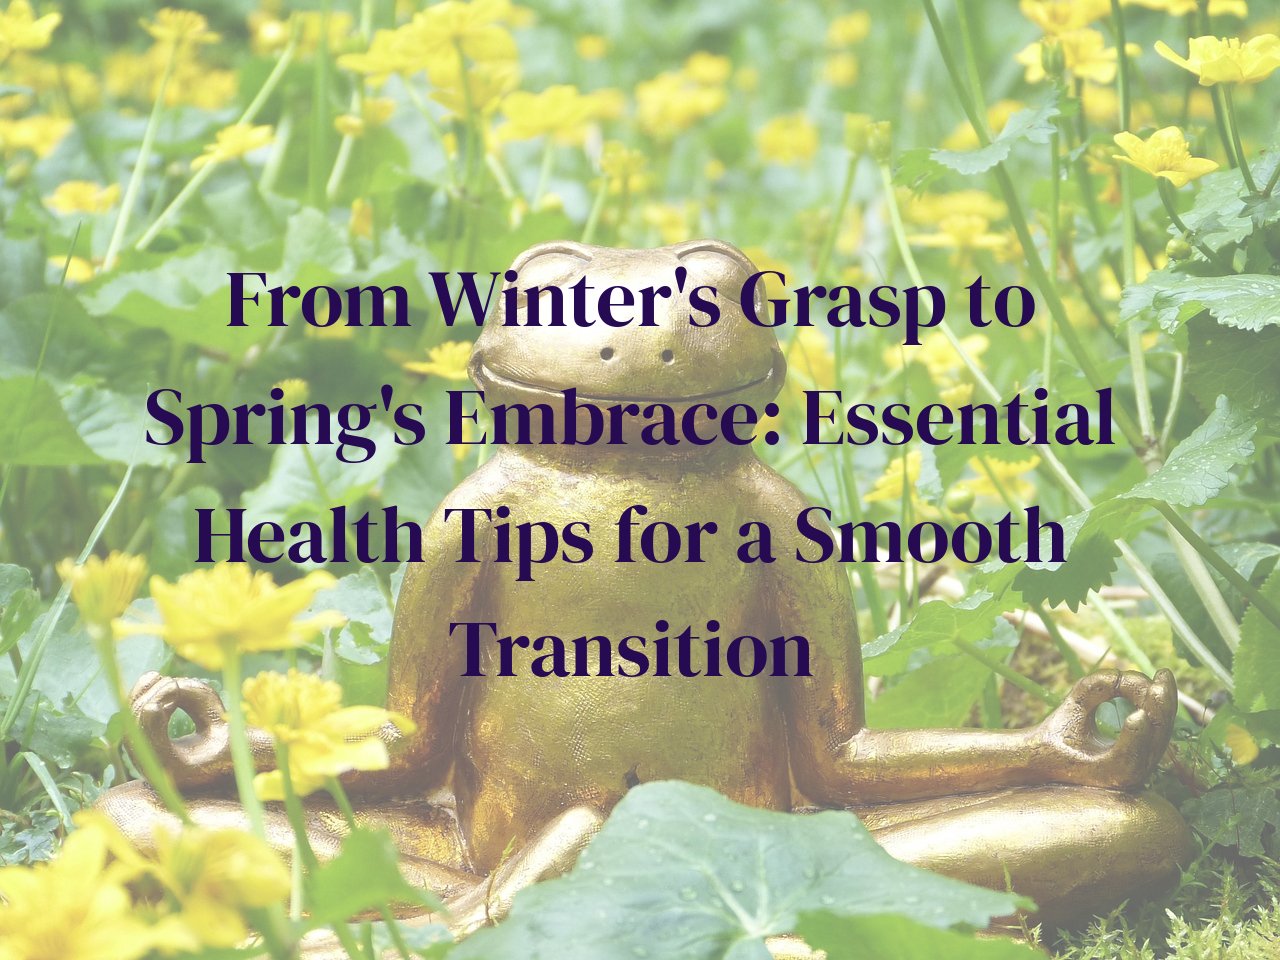 From Winter's Grasp to Spring's Embrace: Essential Health Tips for a Smooth Transition